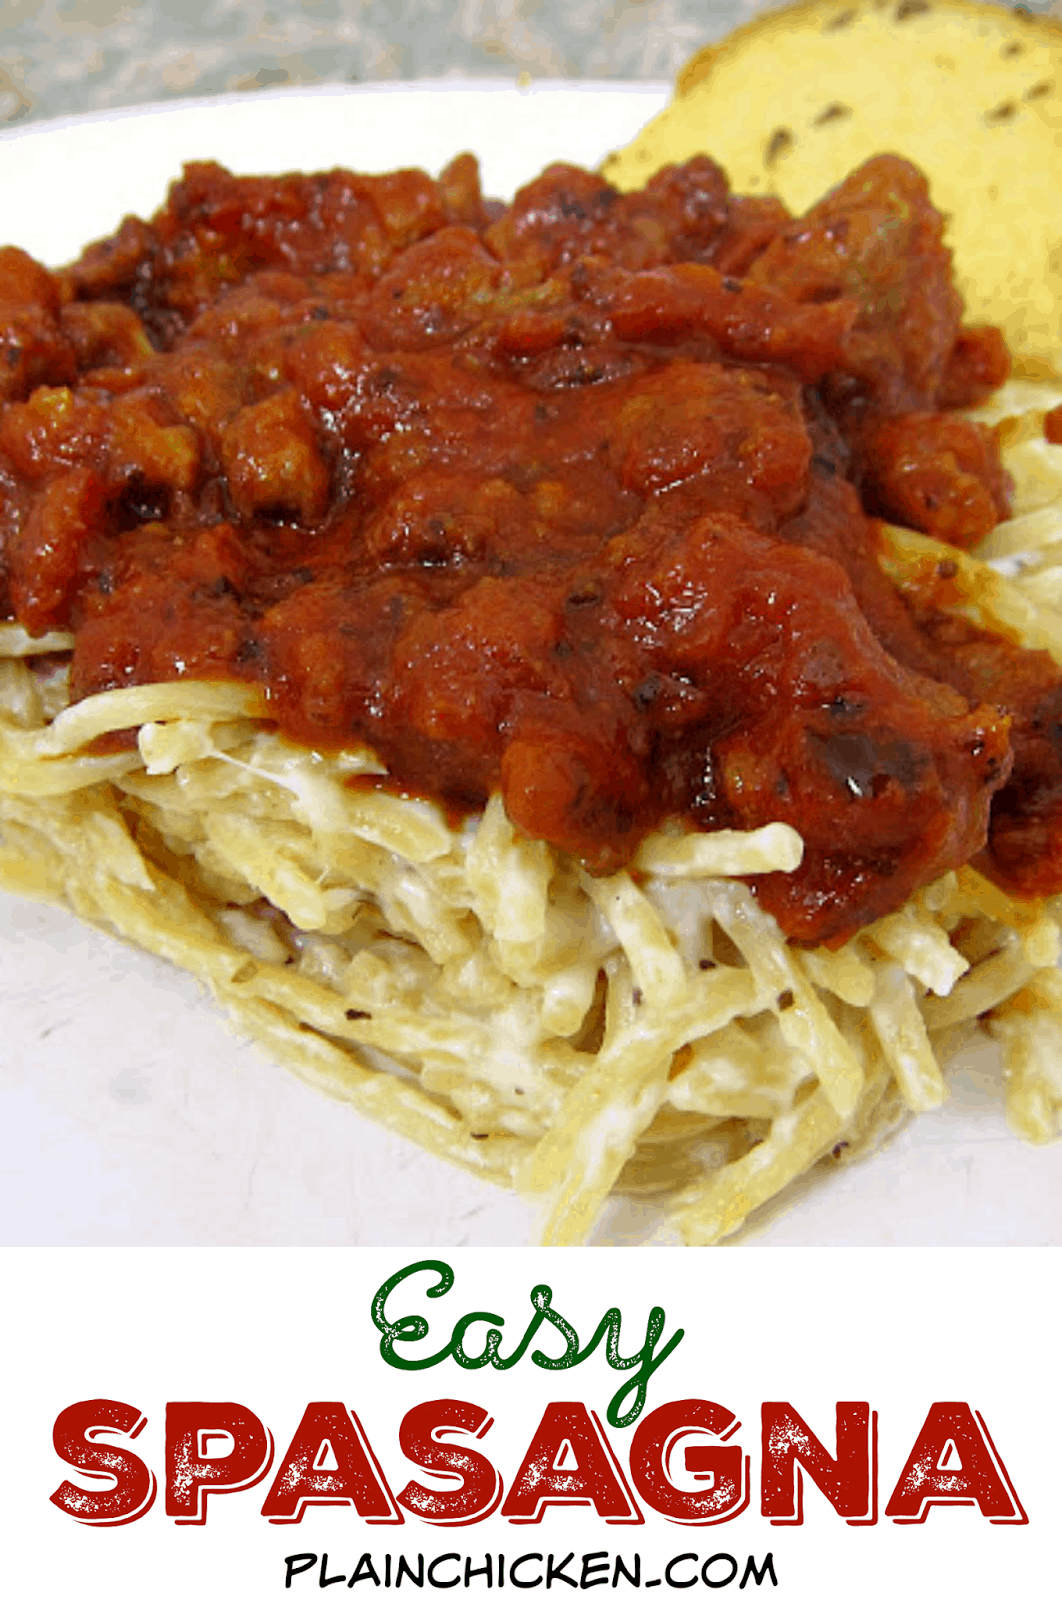 Easy Spasagna Pasta Casserole - spaghetti and lasagna combined to make one amazing casserole! Spaghetti, alfredo sauce, cheese, hamburger and pasta sauce. Ready to eat in 30 minutes! Can also freeze for later. Add a salad and garlic bread for a quick and delicious weeknight meal!